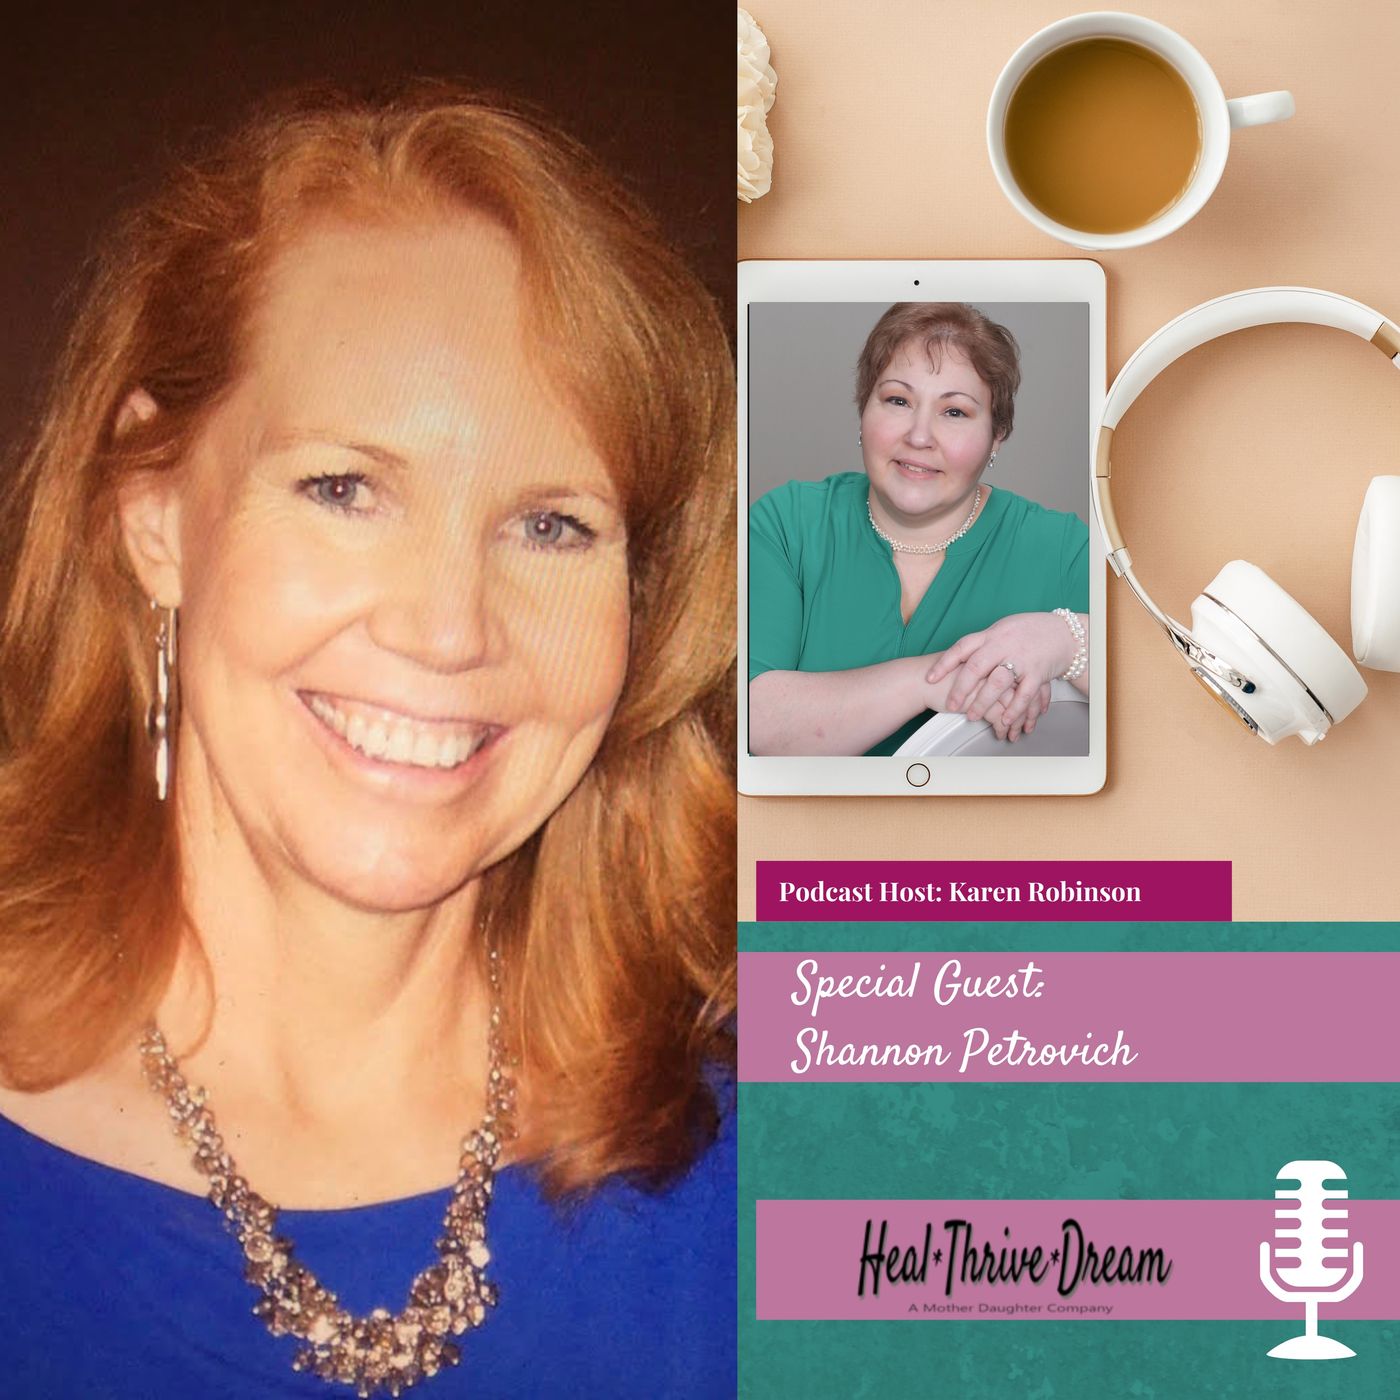 Learn How to Handle Unhealthy Relationships with Shannon Petrovich